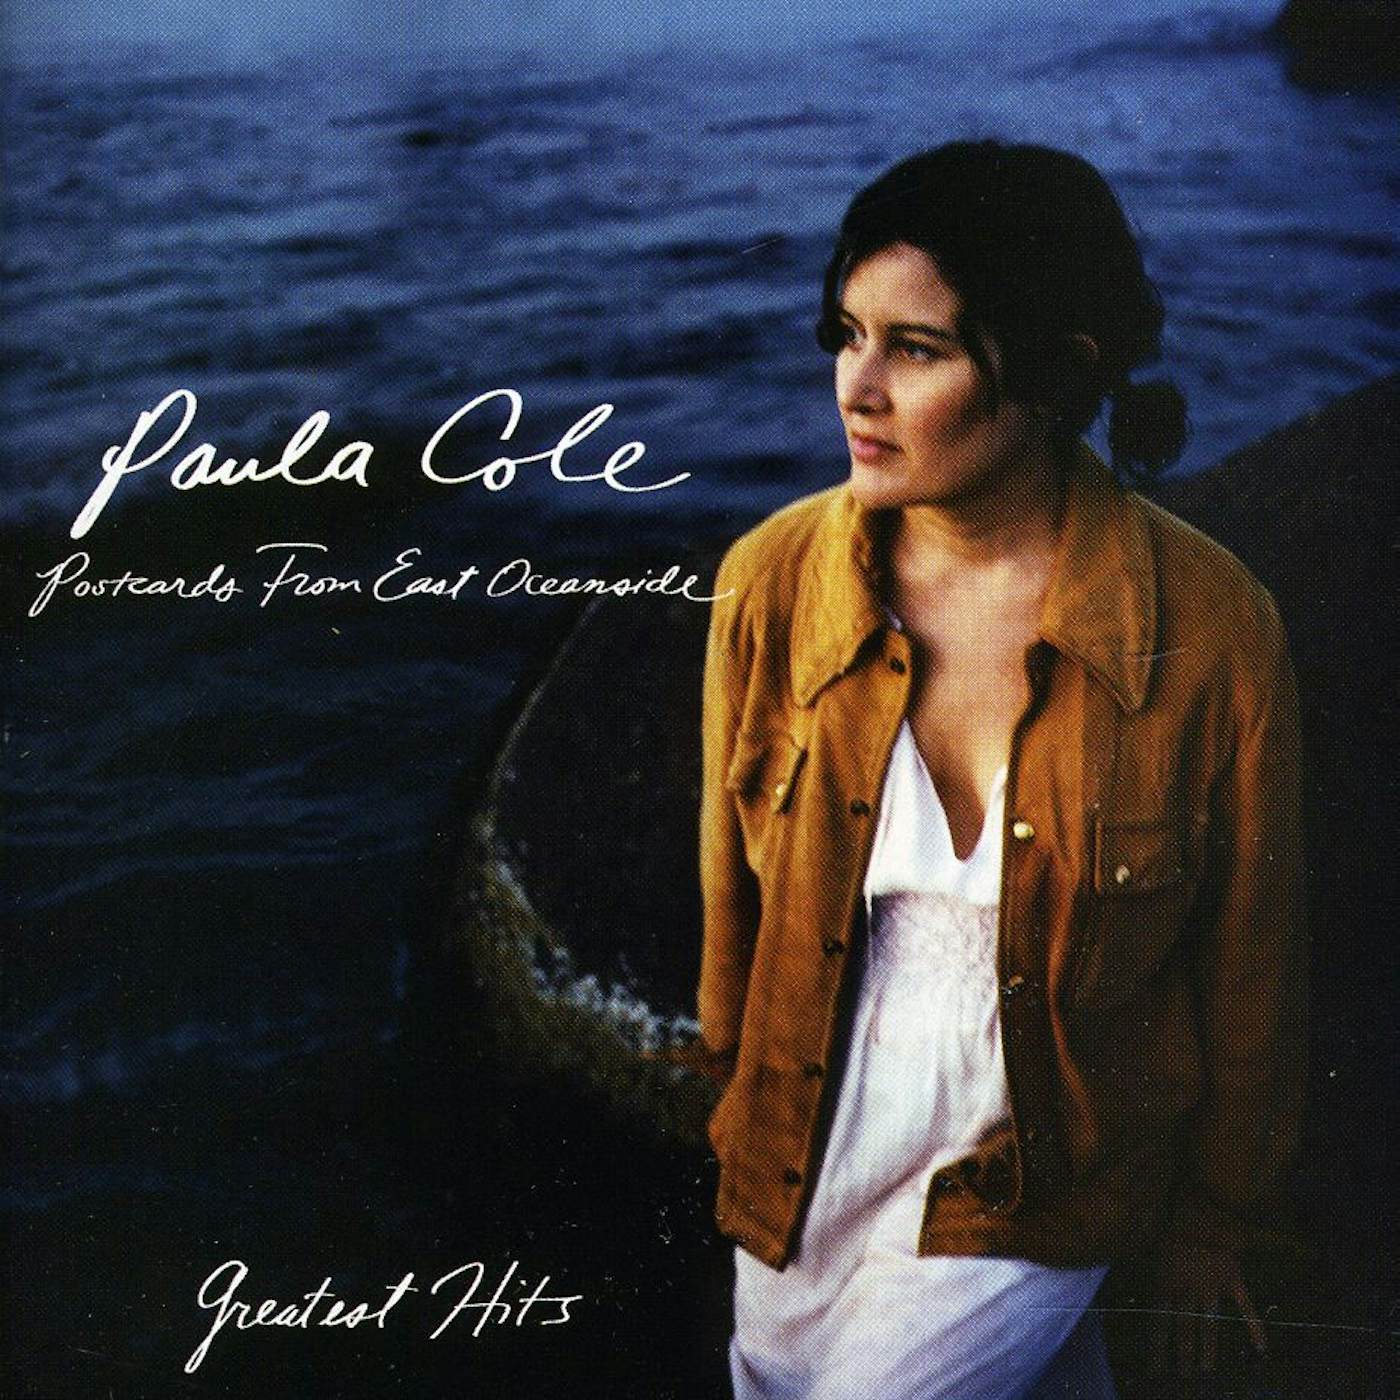 Paula Cole GREATEST HITS: POSTCARDS FROM EAST OCEANSIDE CD